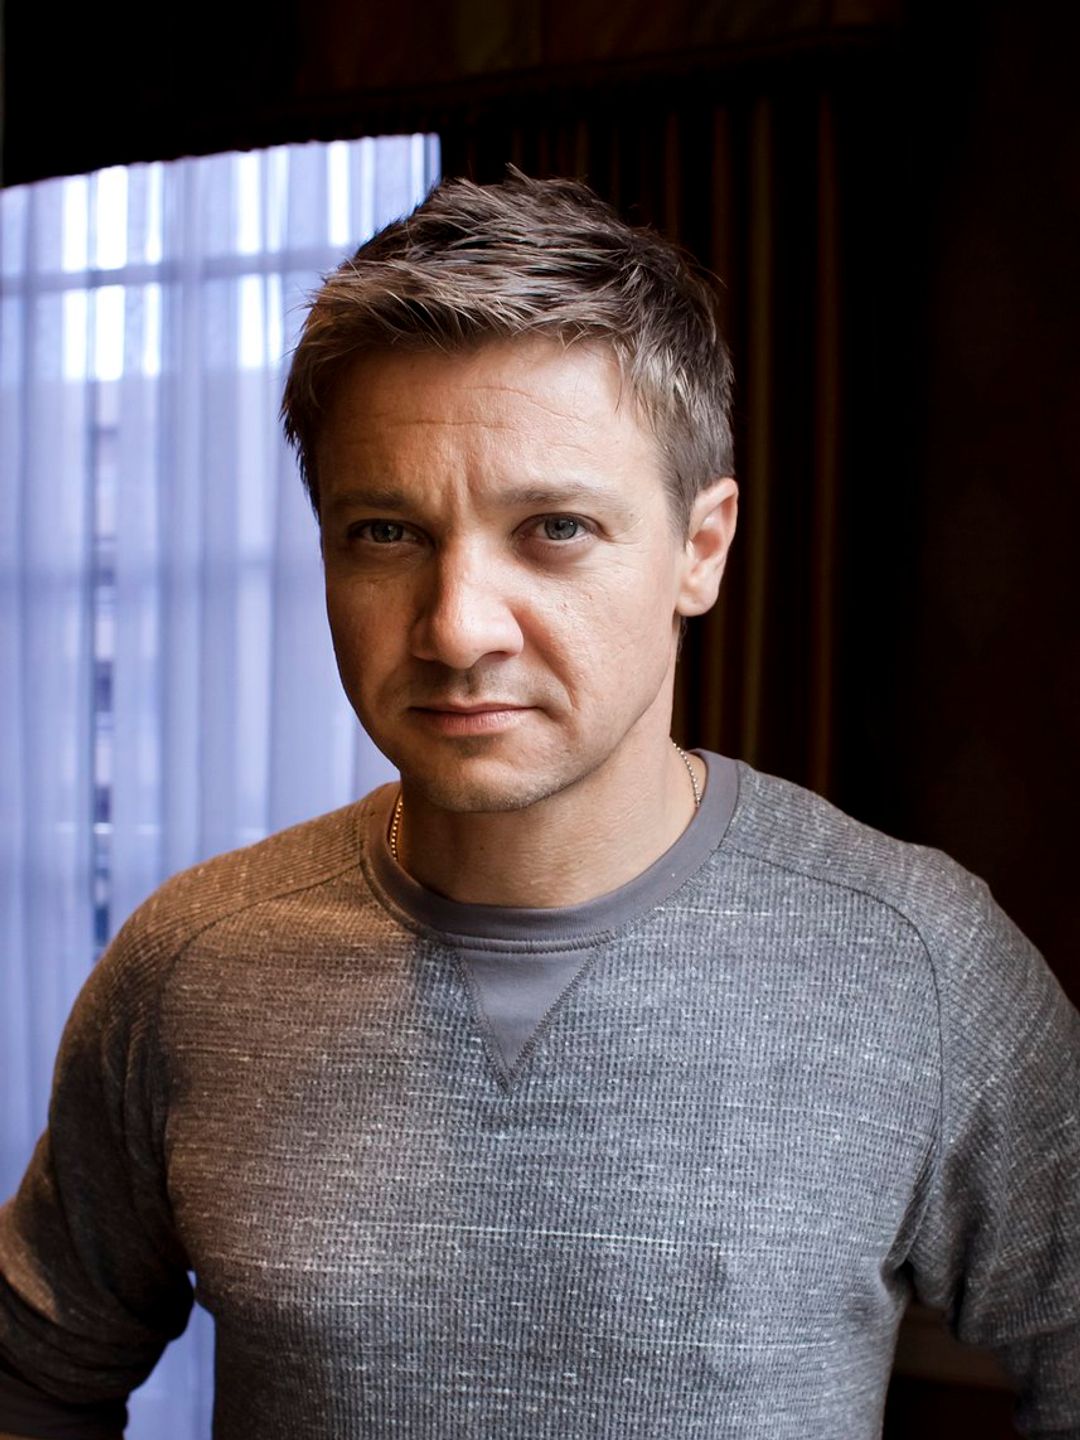 Jeremy Renner in his youth